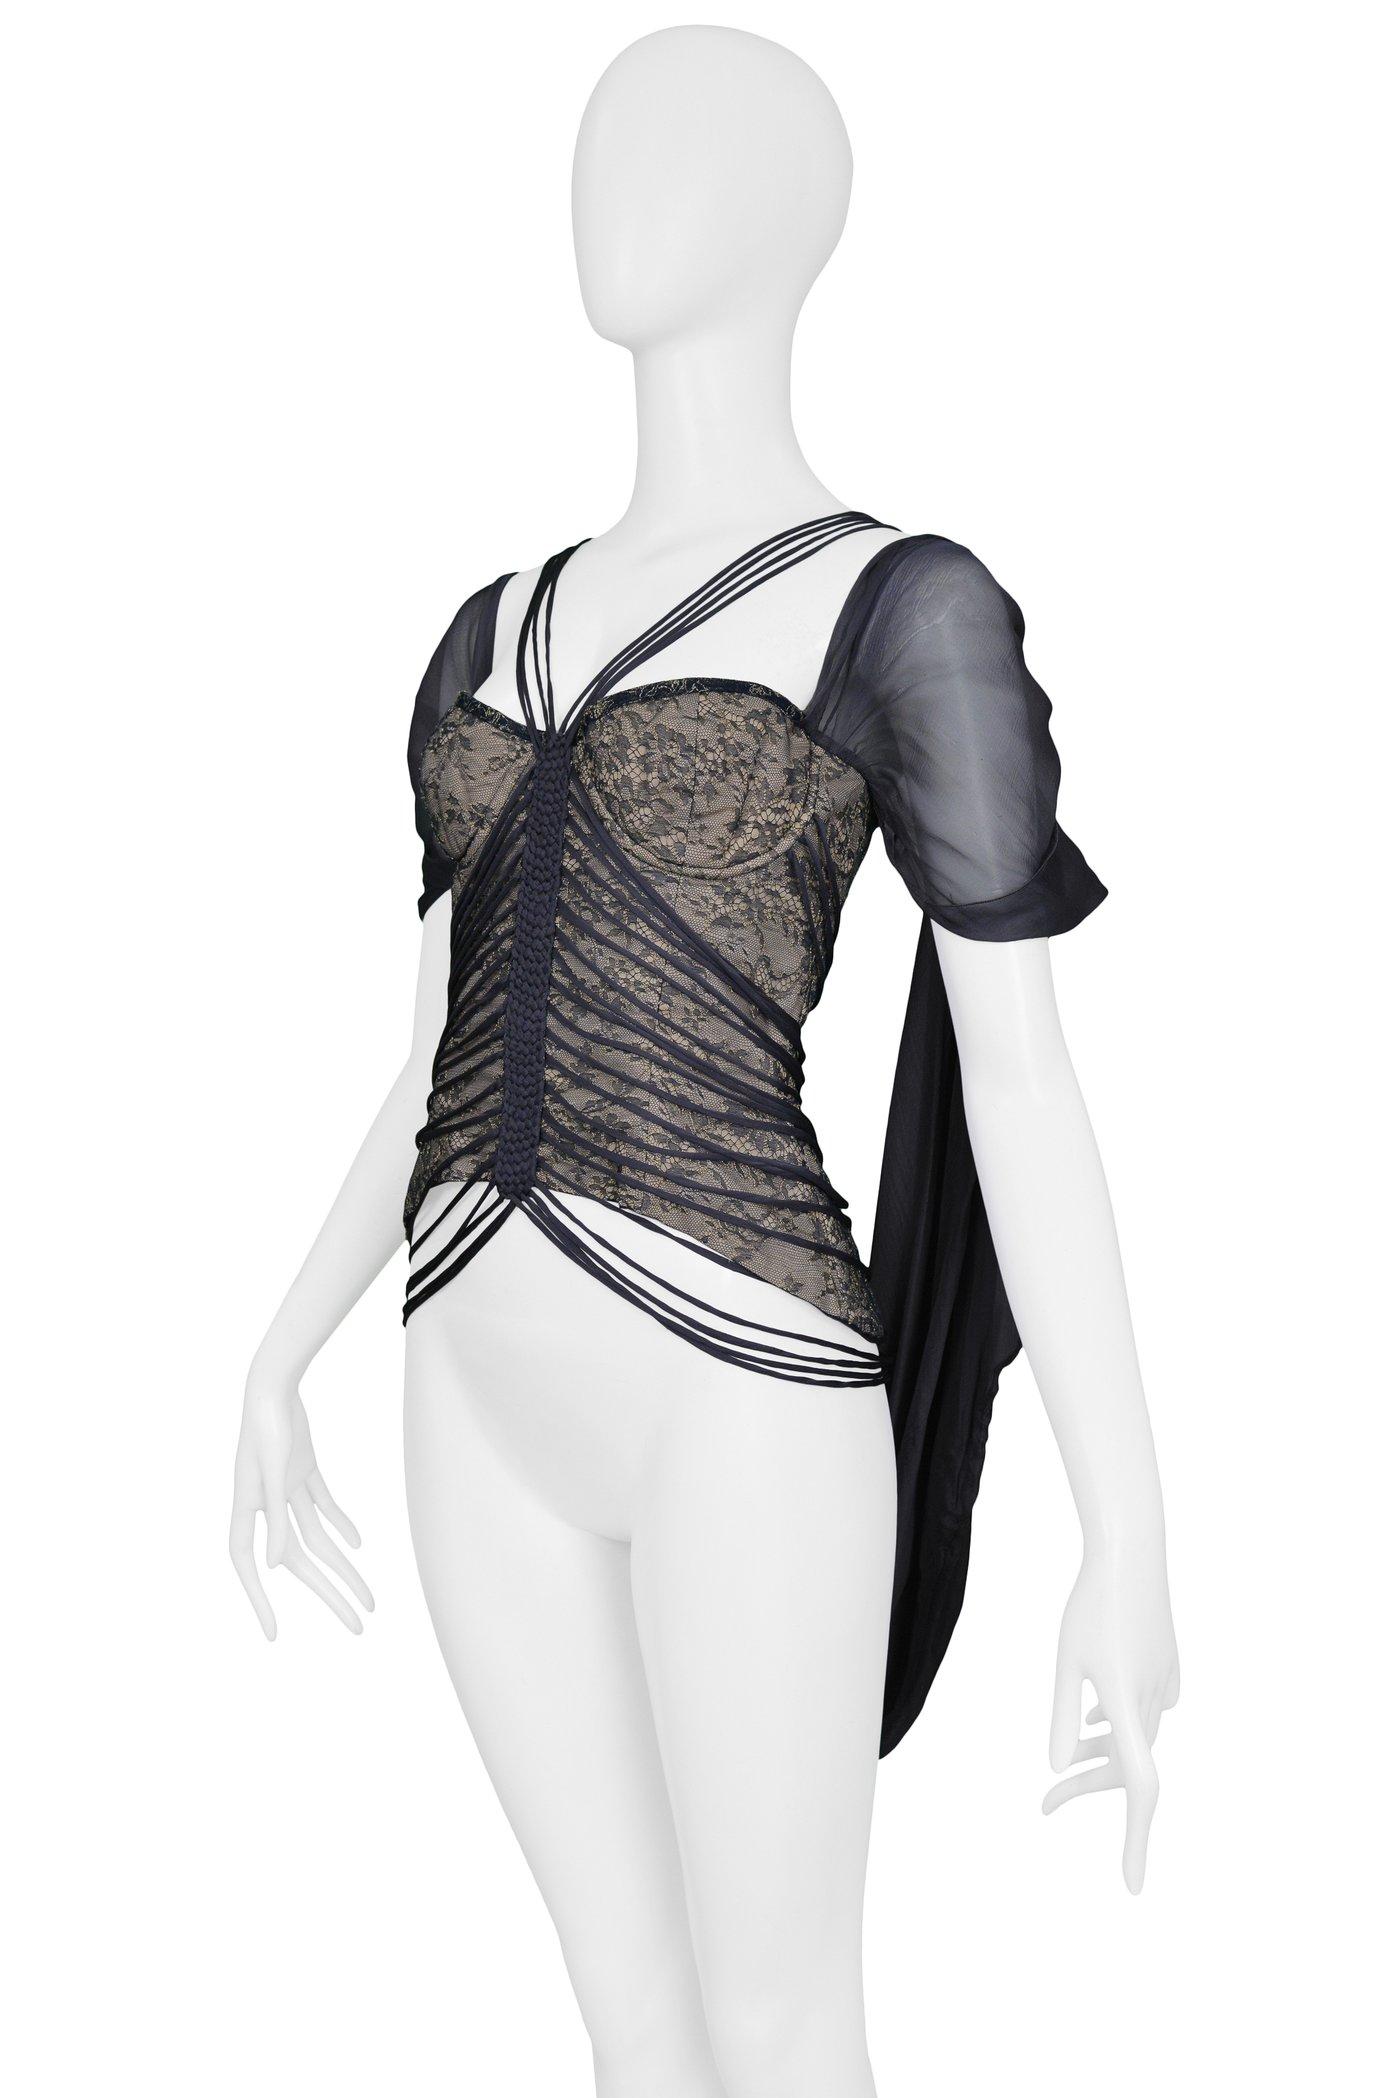 Resurrection is pleased to offer this vintage Hussein Chalayan grey chiffon and lace bustier top featuring several decorative bands and straps, braided centerpiece, center back zipper, overlay sleeves with nude lining.

Hussein Chalayan
Size